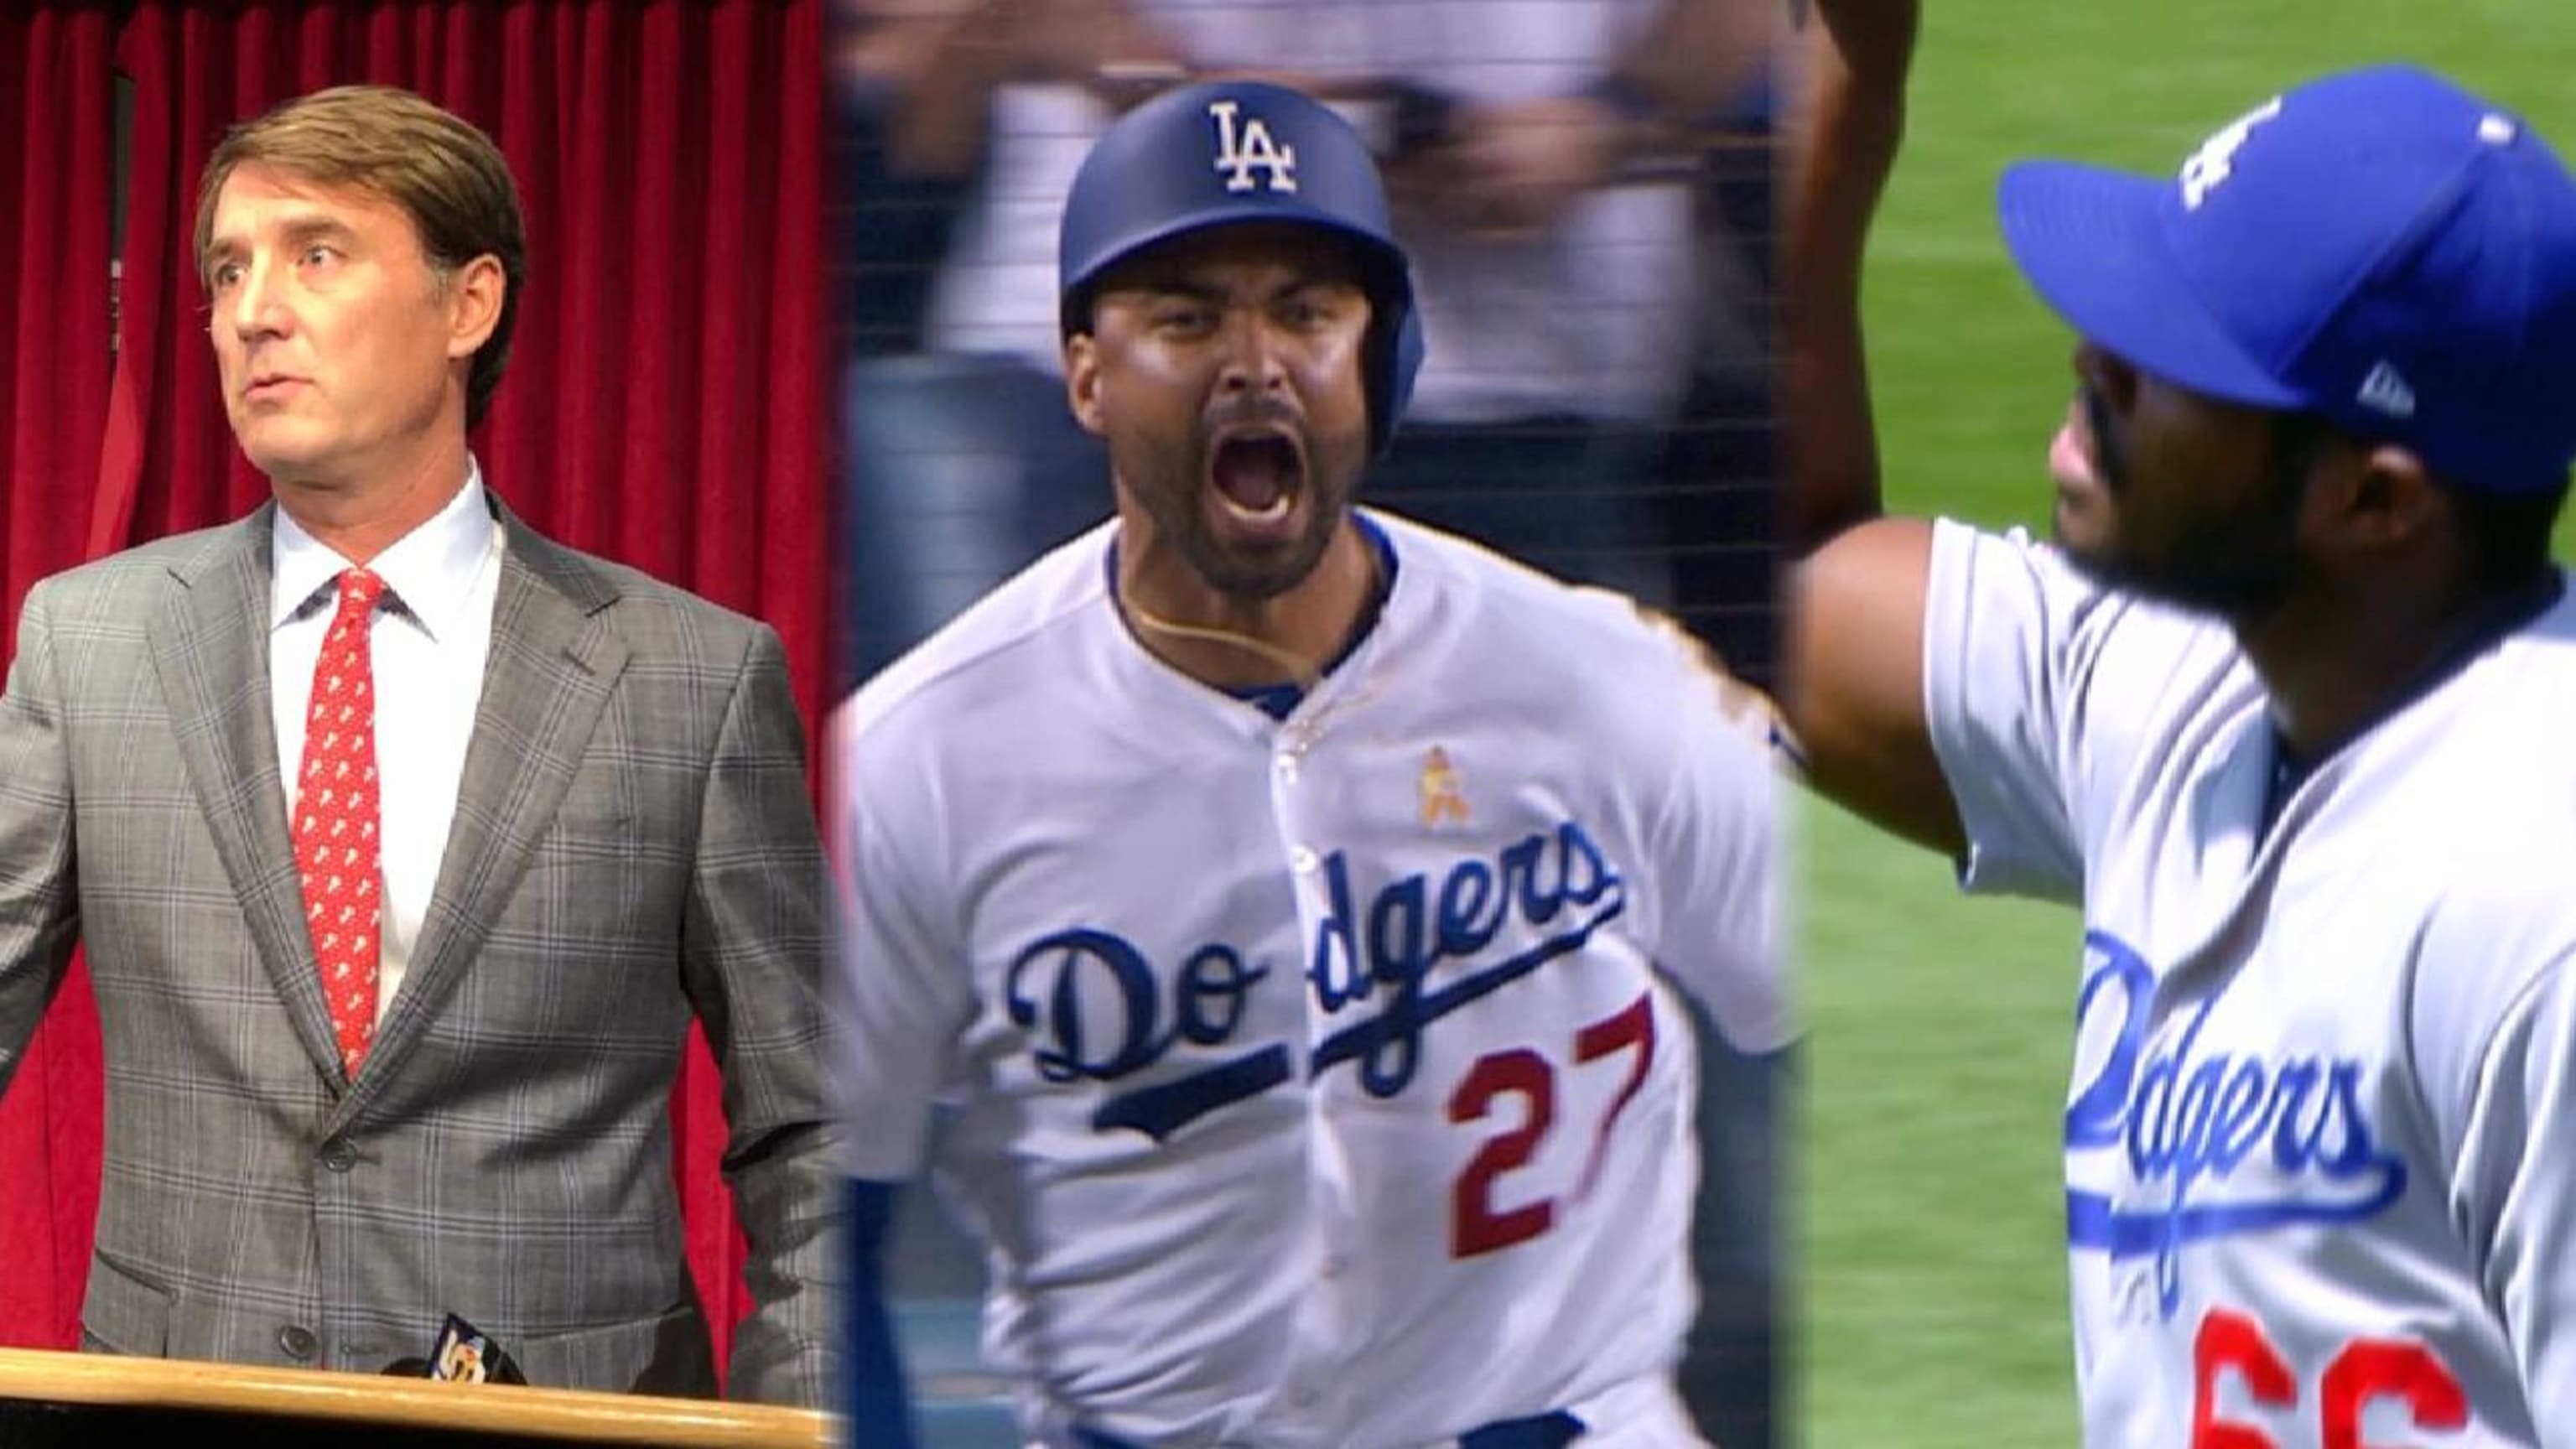 Puig pushing Ethier out of LA; which teams could have trade interest? 